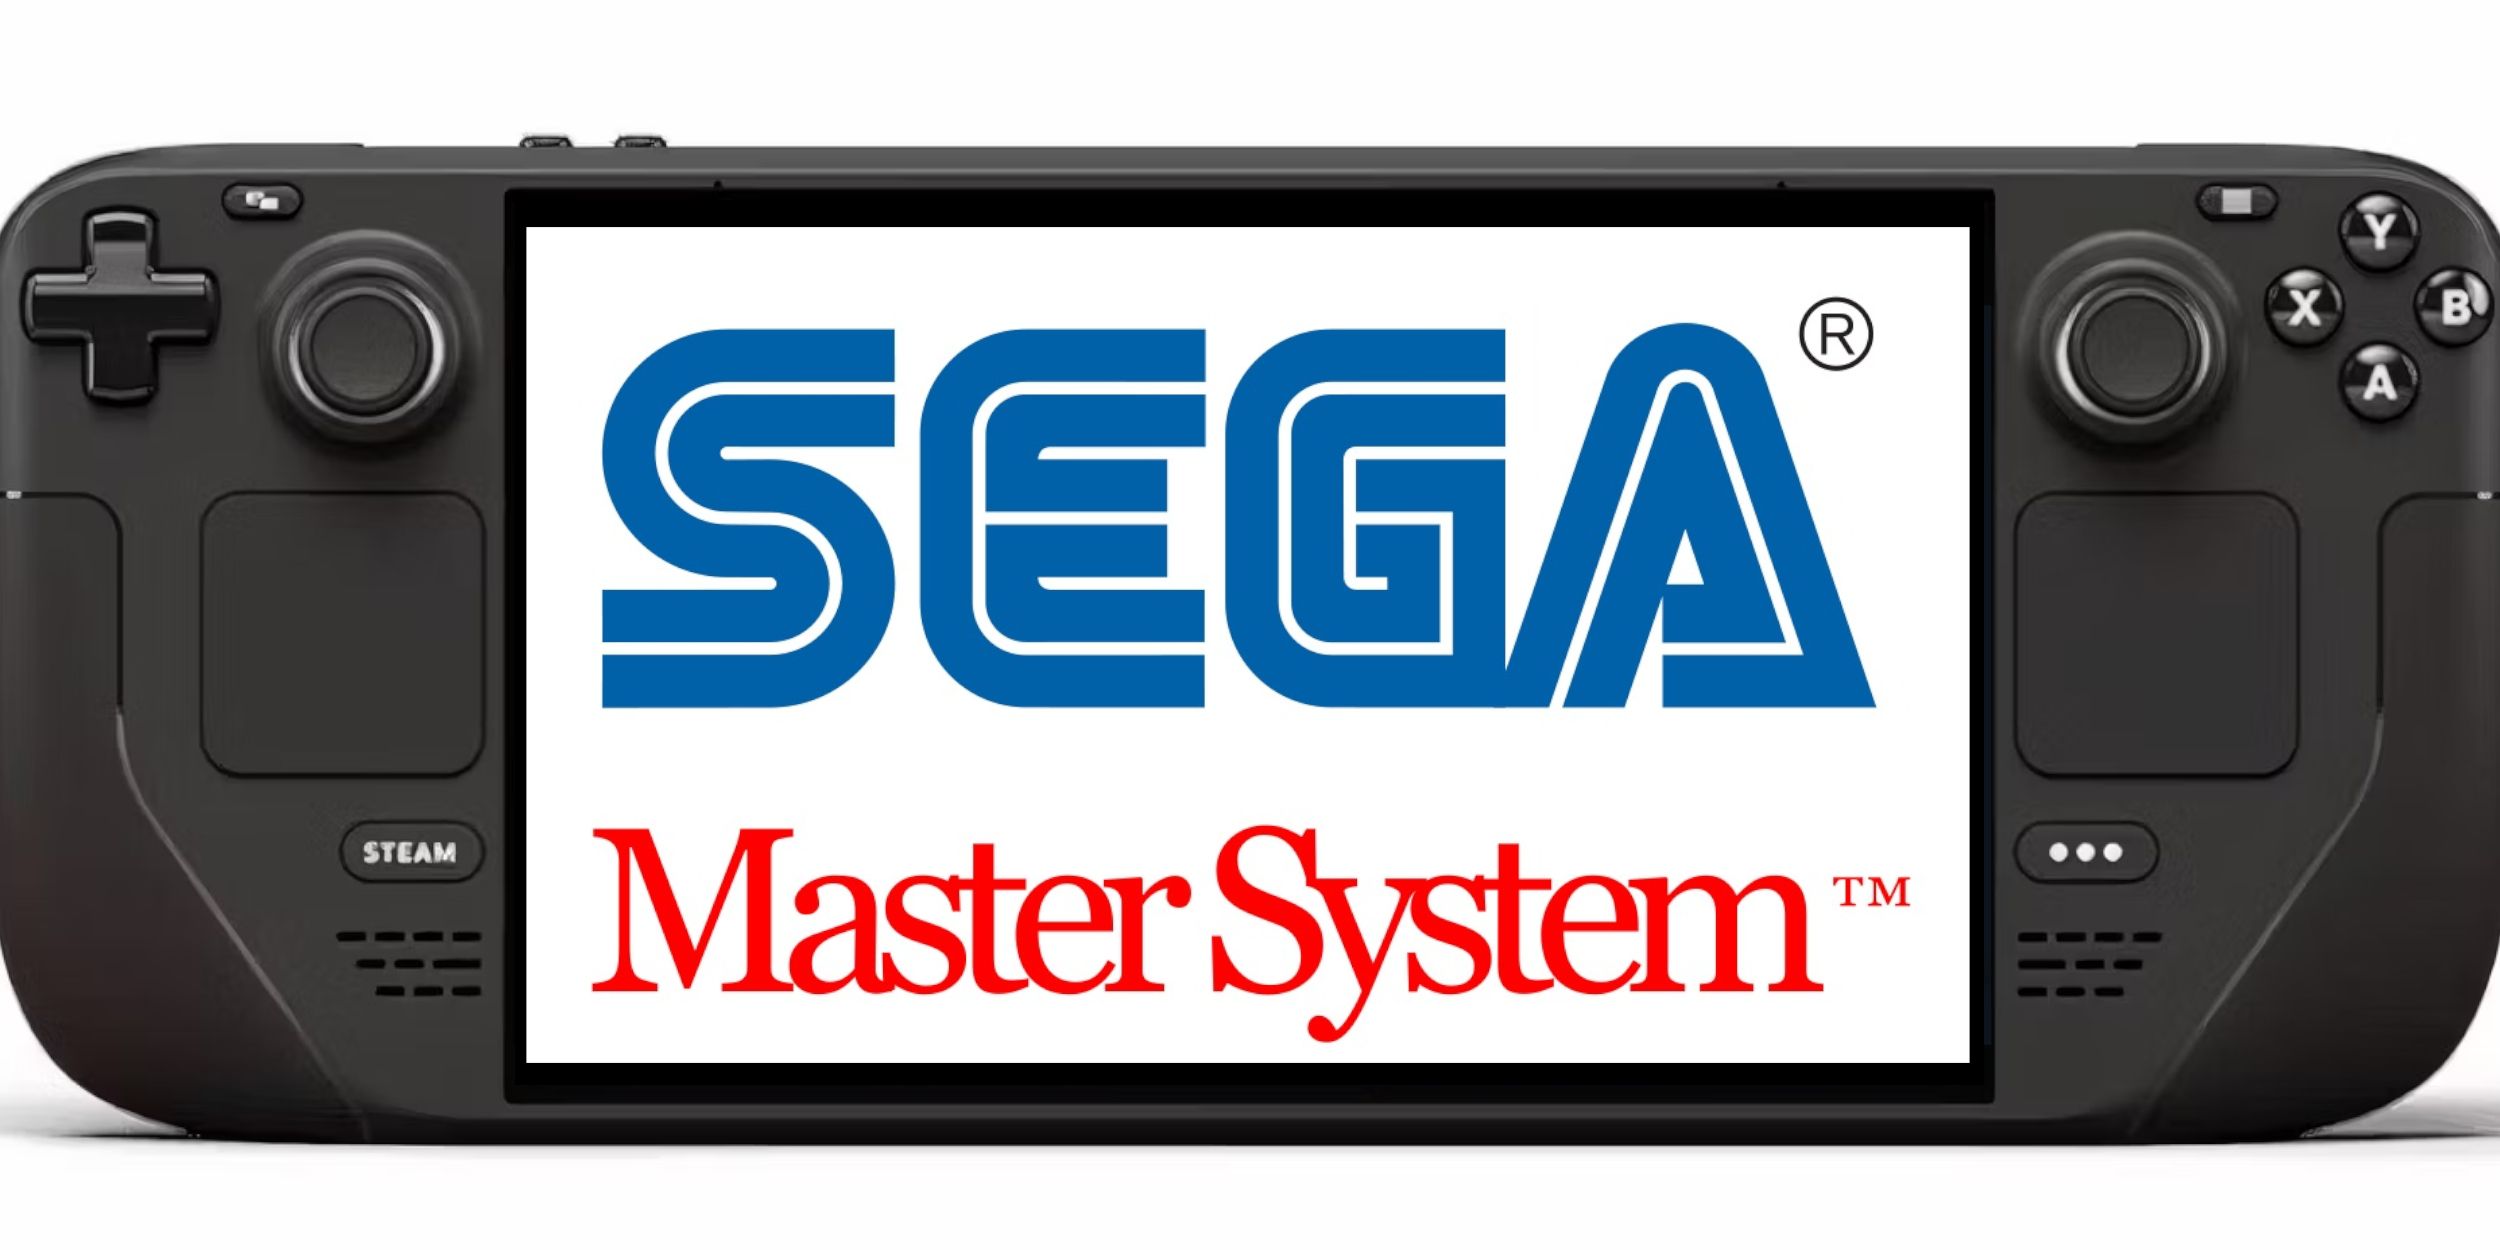 Steam Deck with the Sega Master System logo